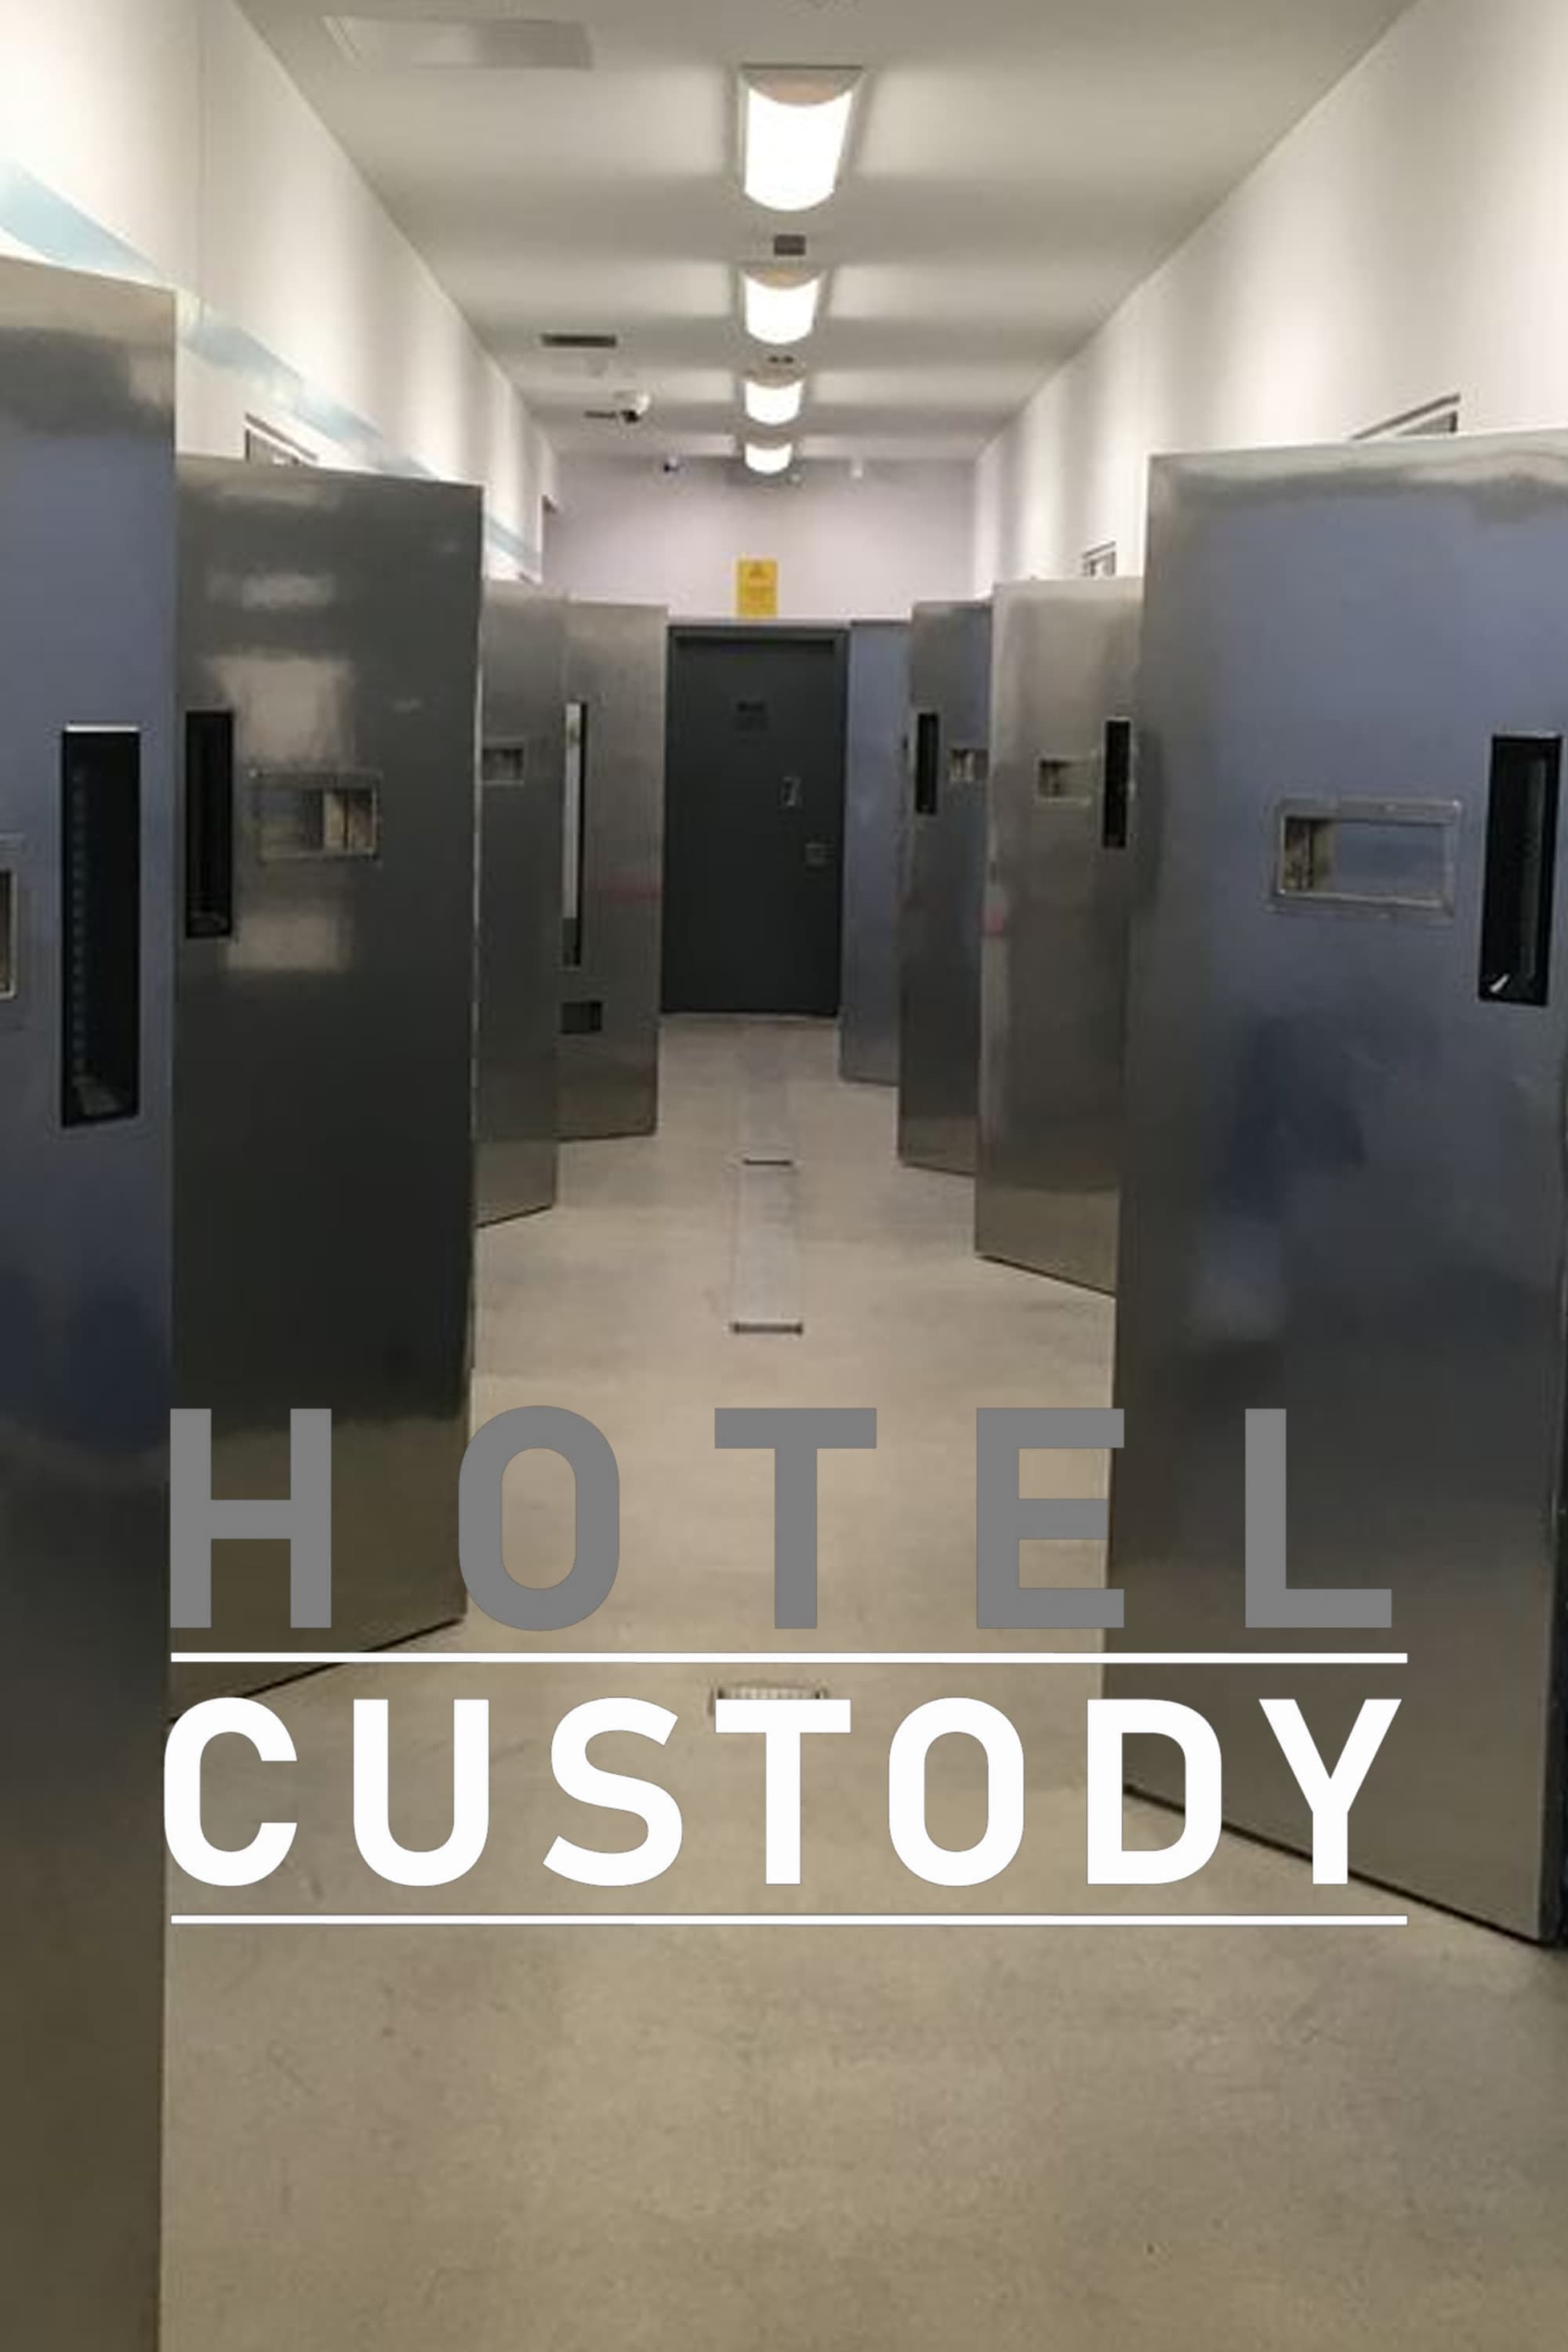 Hotel Custody TV Shows About Police